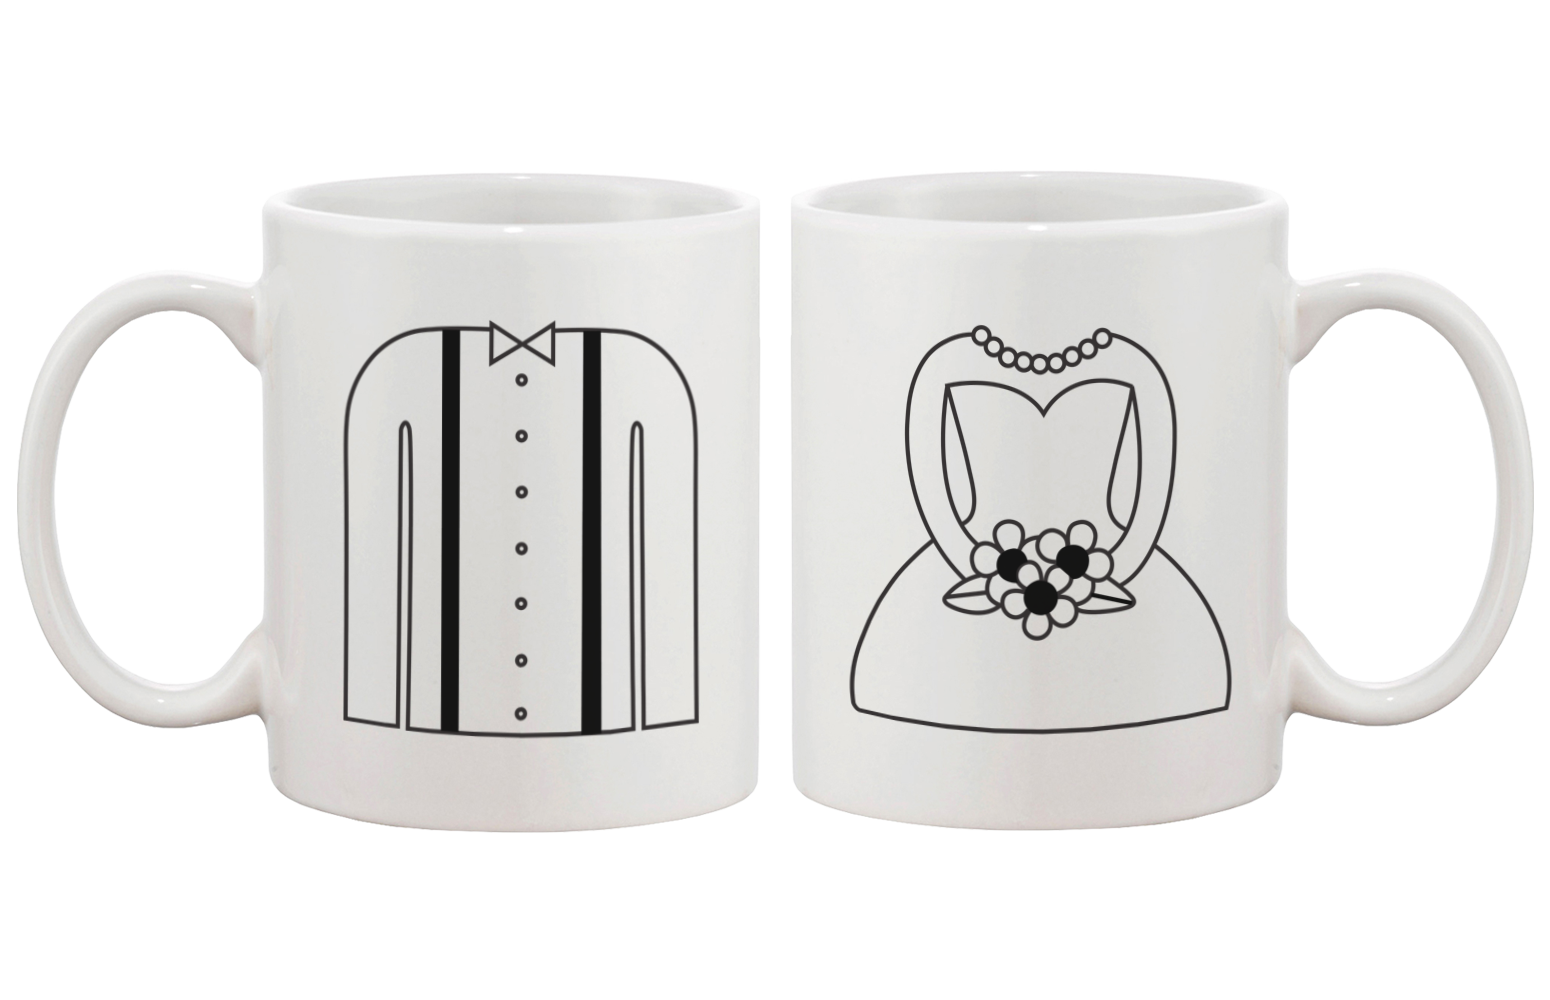 Matching Couple Mugs Love Statement Her One His Only Gift – Matchizz